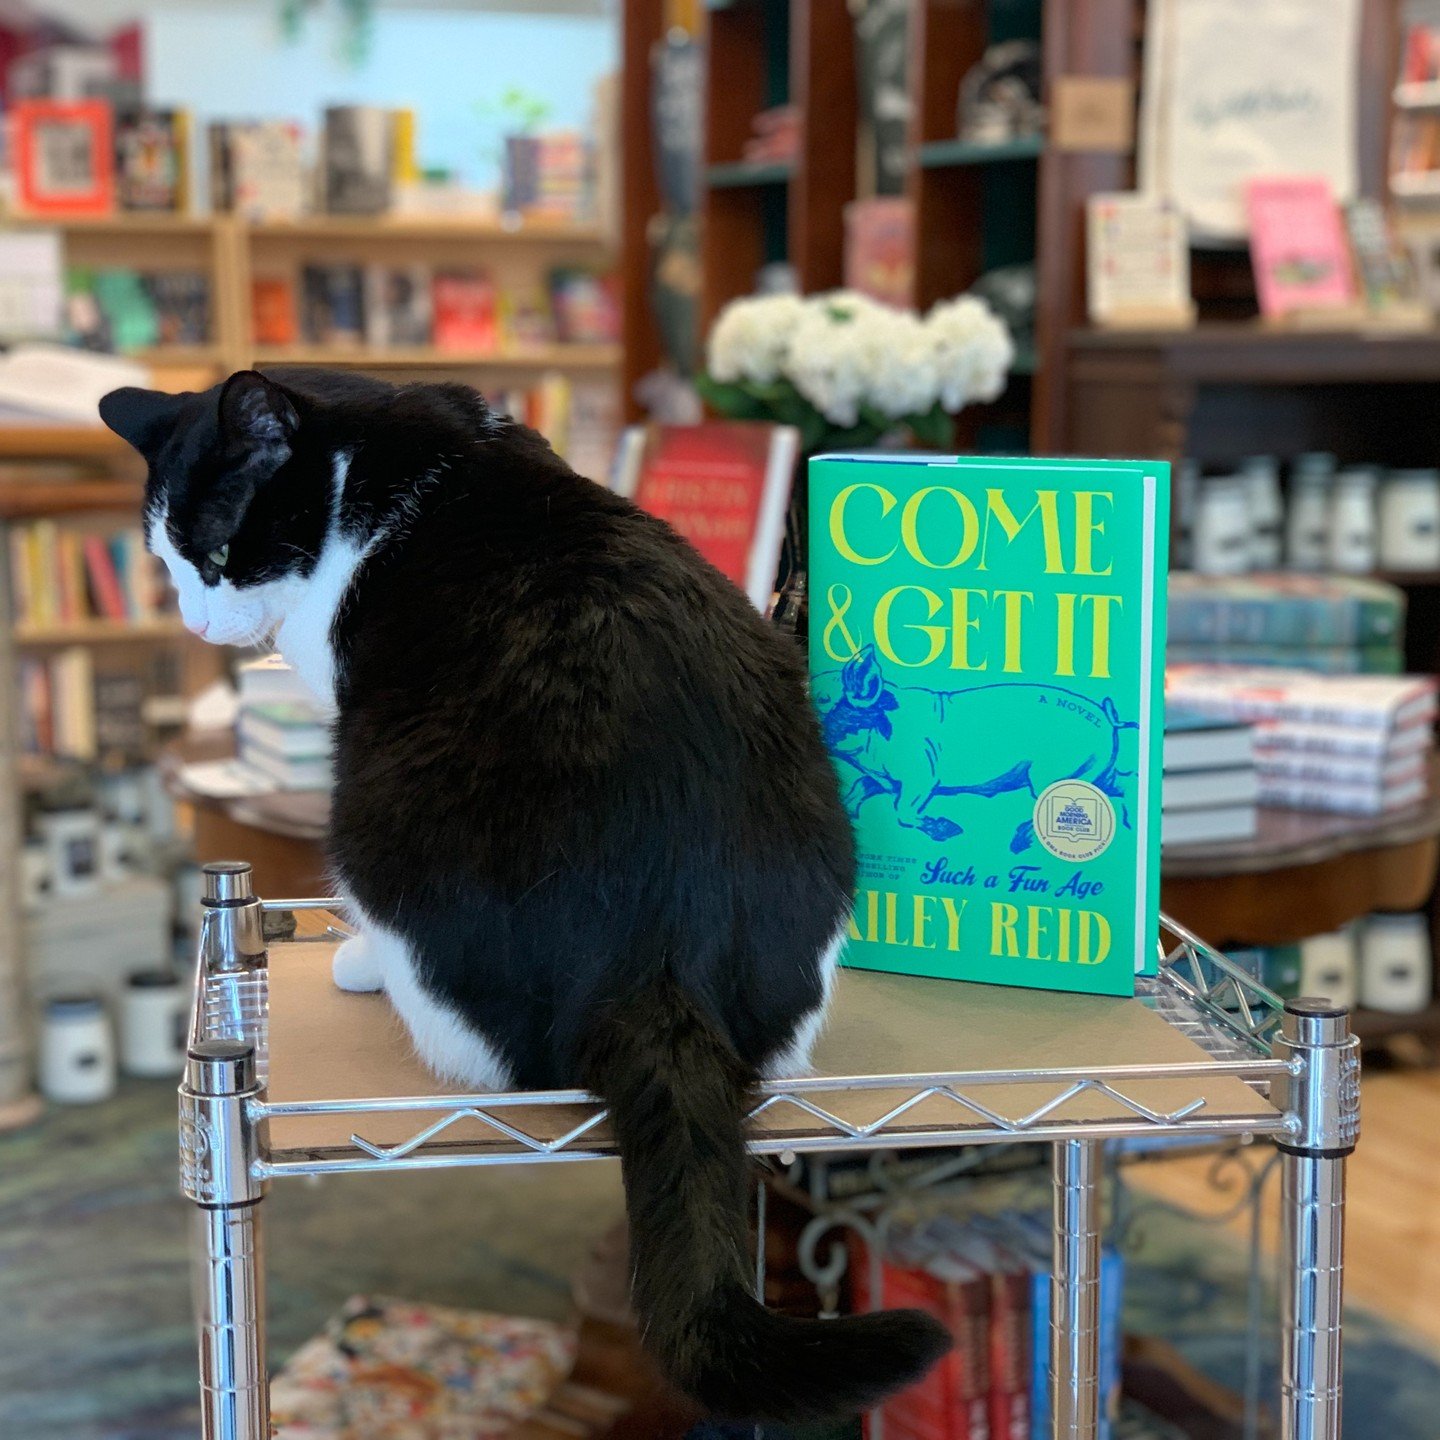 Getting ✨behind✨ on your reading goals for this year? Goose has the answer: a fresh and intimate portrait of desire, consumption and reckless abandon, &quot;Come and Get It&quot; is a tension-filled story about money, indiscretion, and bad behavior.
